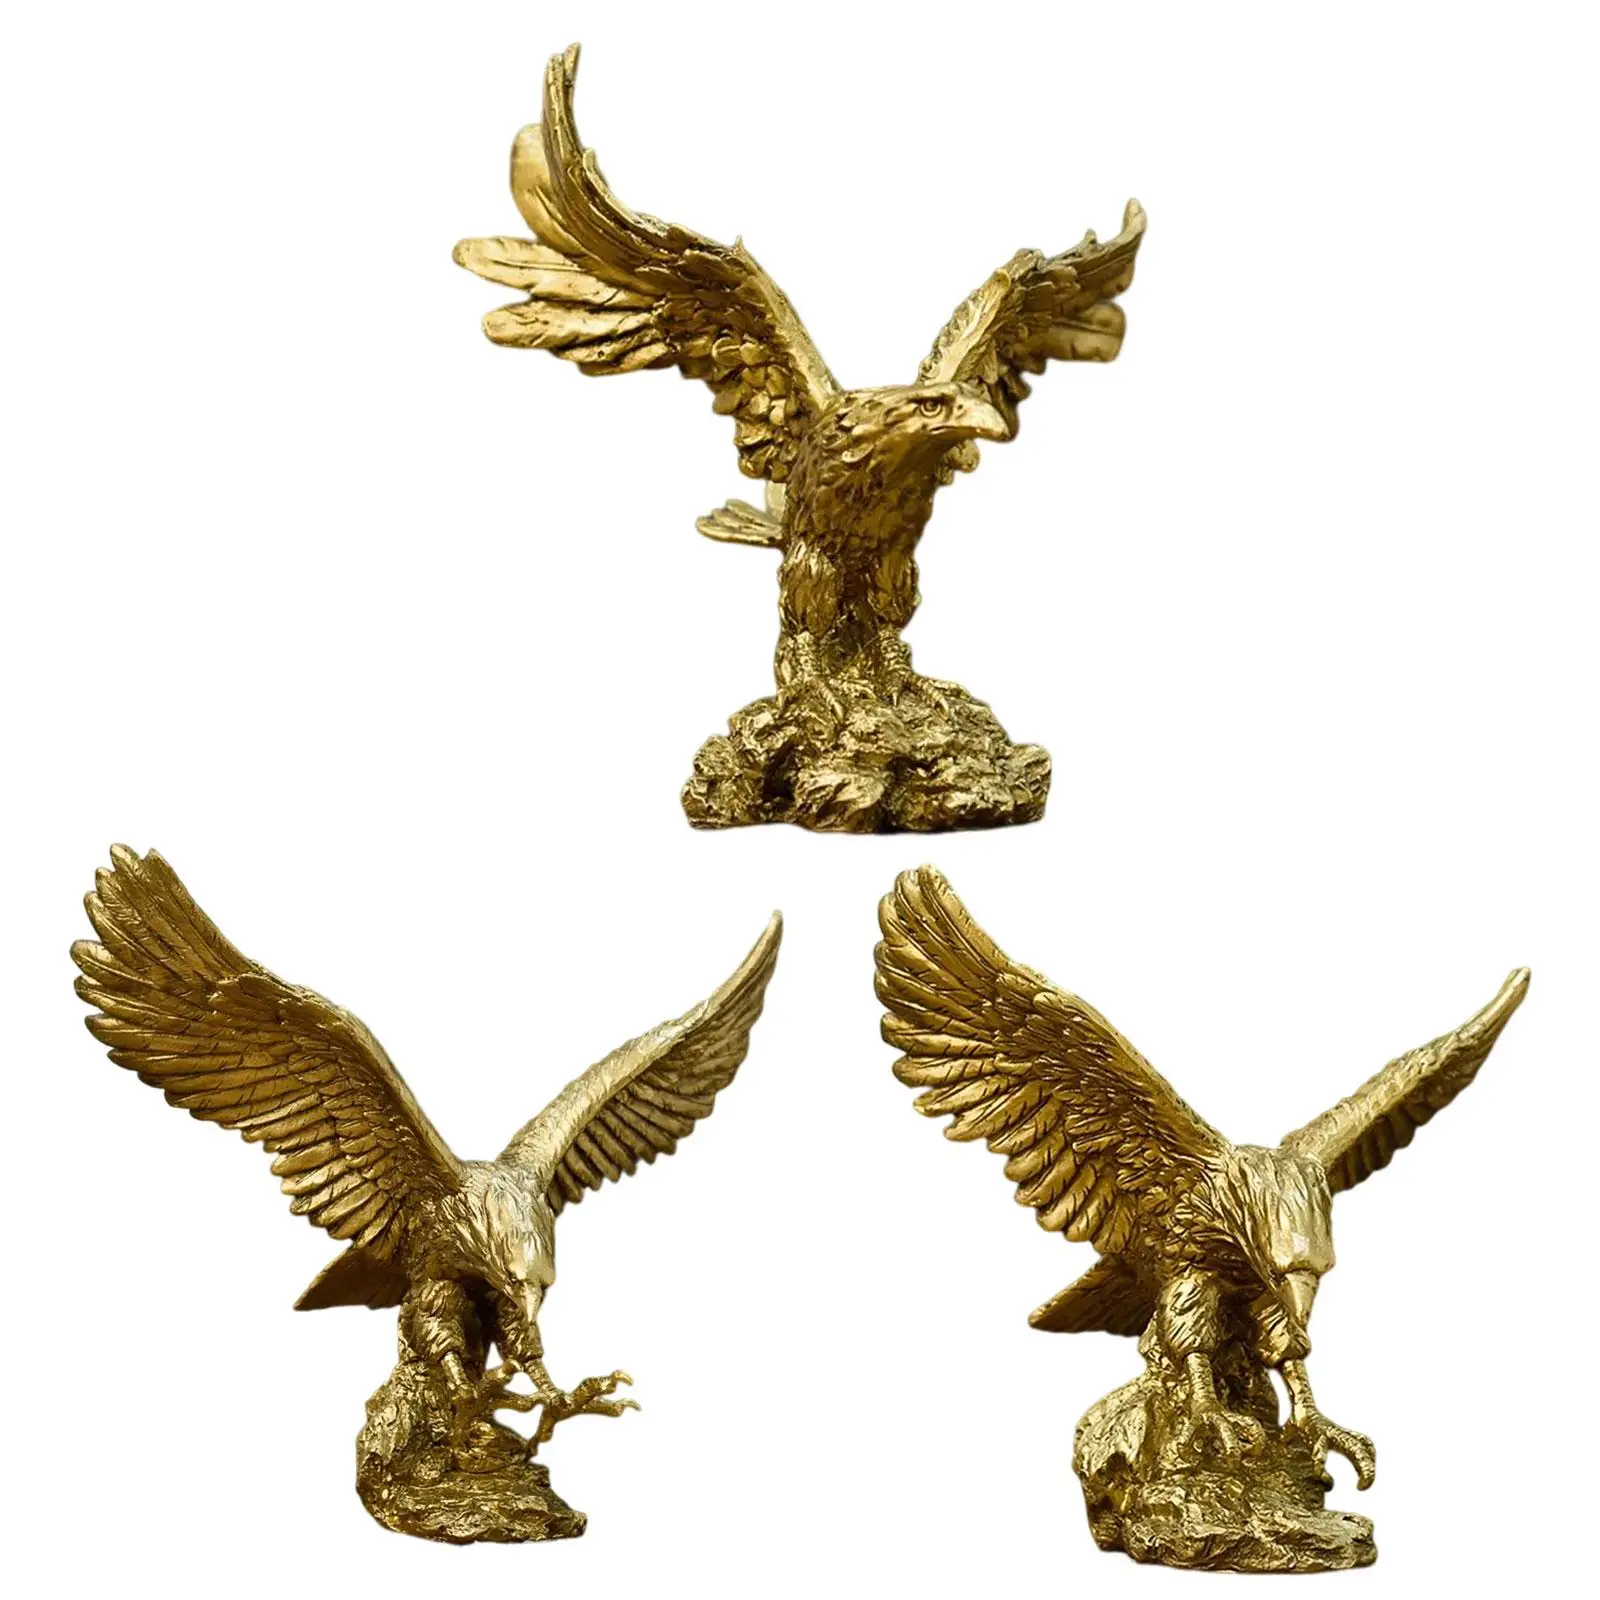 Resin Eagle Sculpture Collection Ornament Craft Animal Figurine for Table Centerpiece Restaurant Dining Room Home Decor